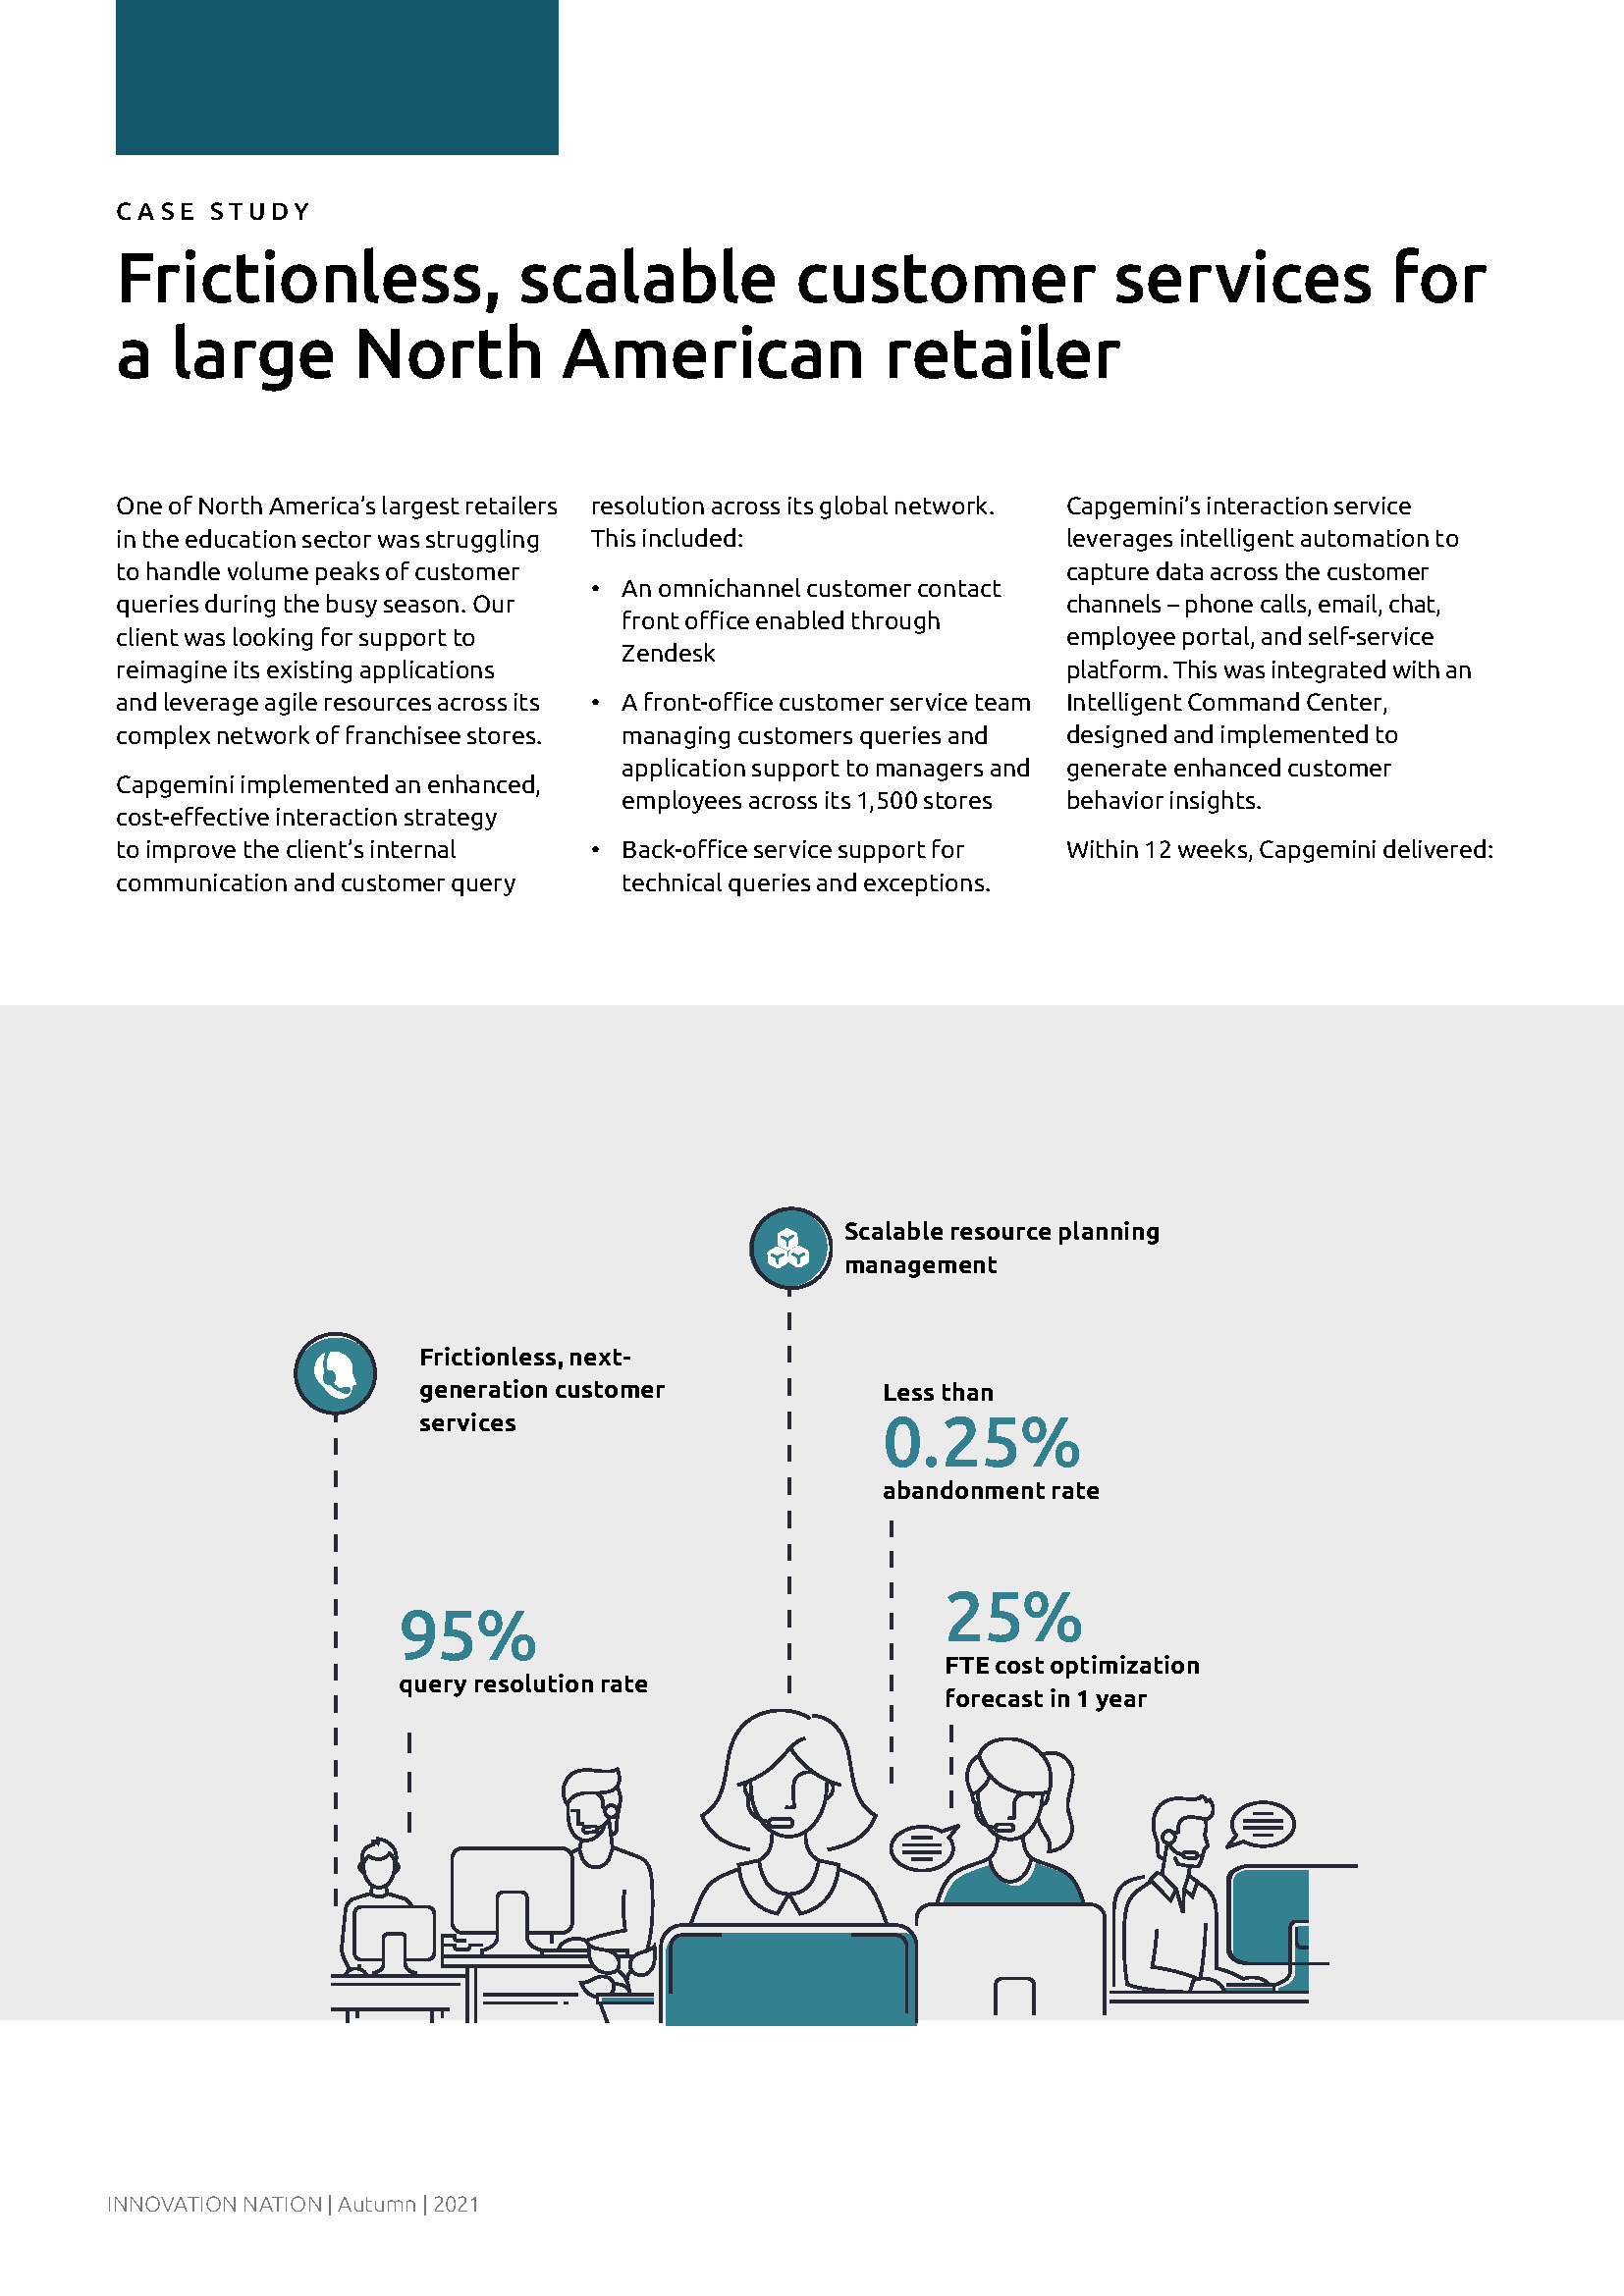 CASE STUDY - Frictionless, scalable customer services for a large North American retailer v1